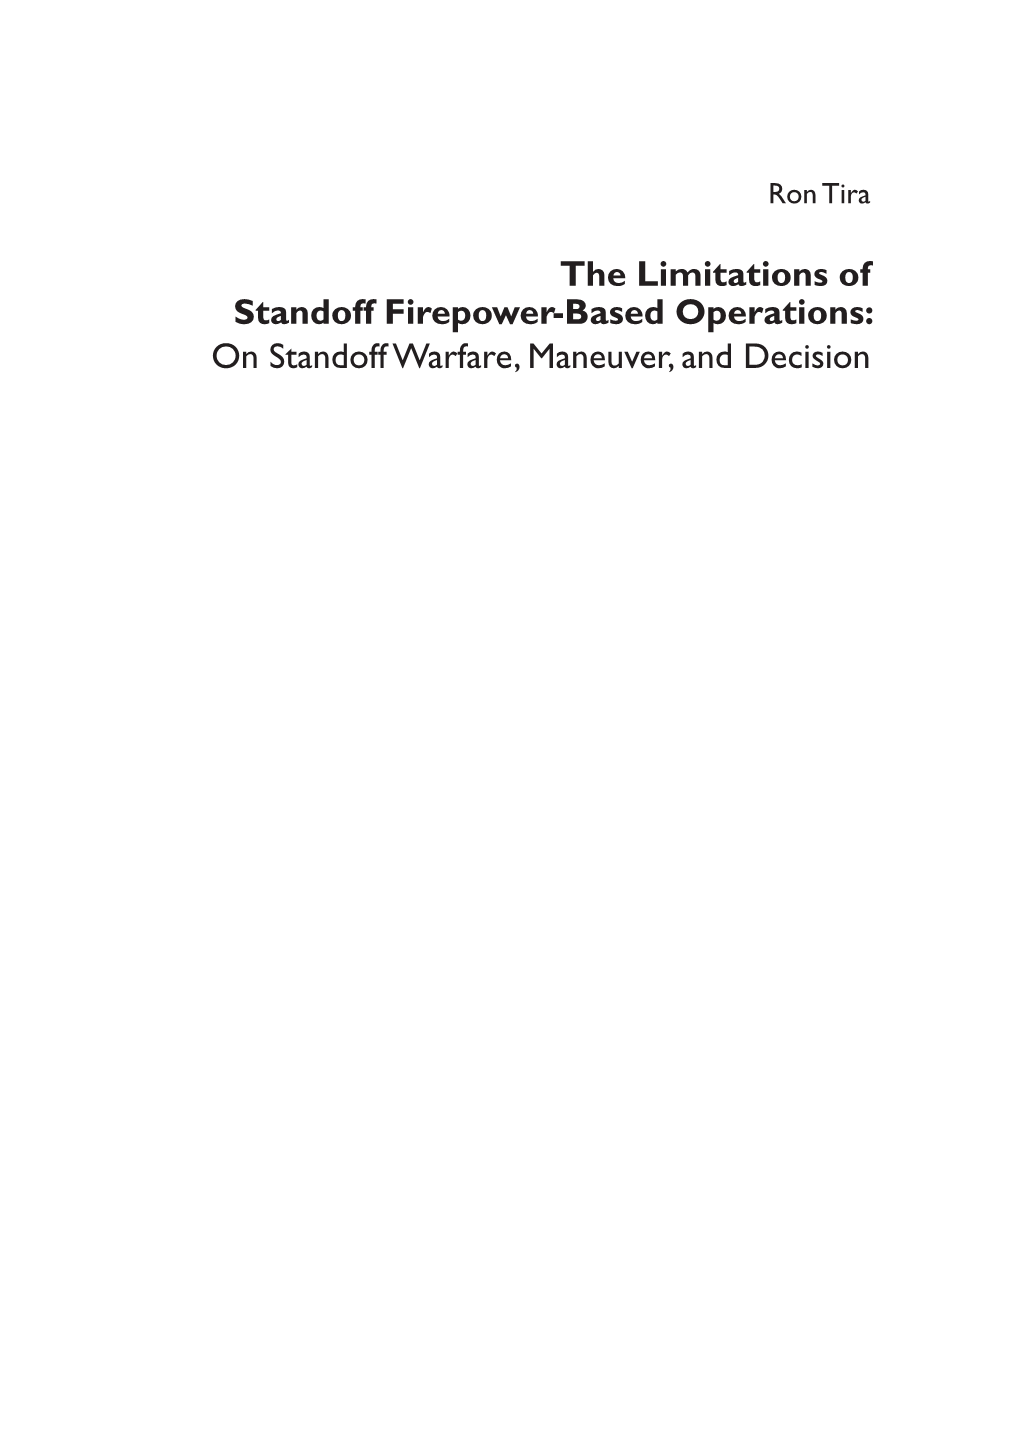 On Standoff Warfare, Maneuver, and Decision Institute for National Strategic Studies